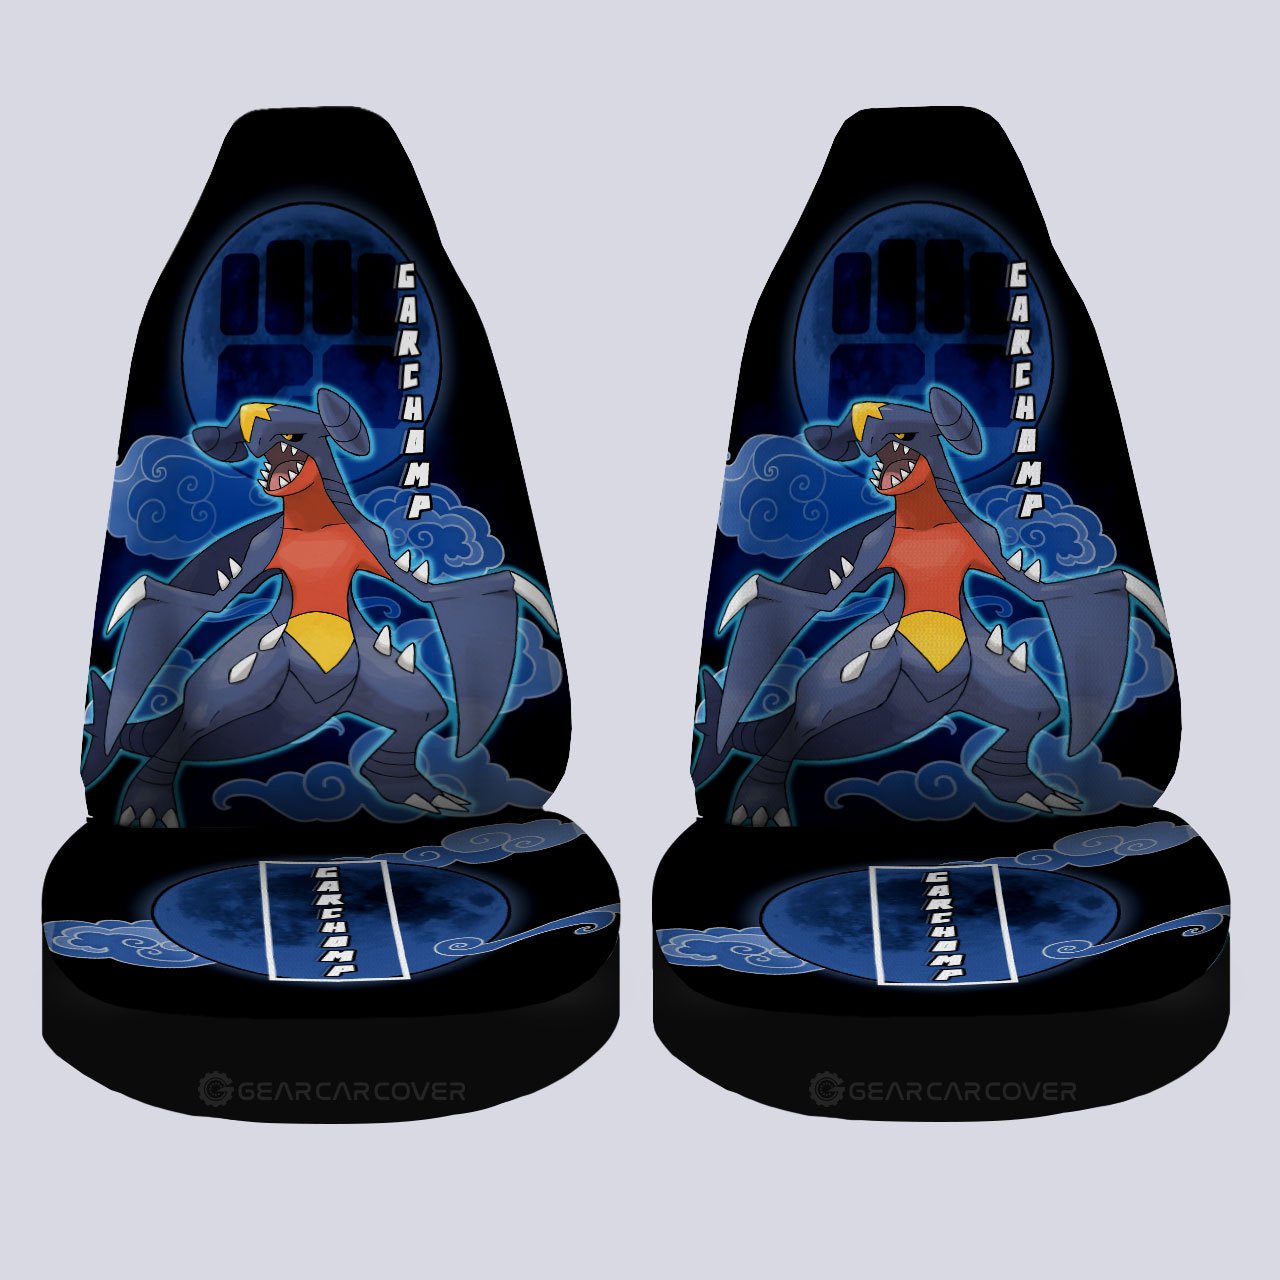 Garchomp Car Seat Covers Custom Car Accessories For Fans - Gearcarcover - 4